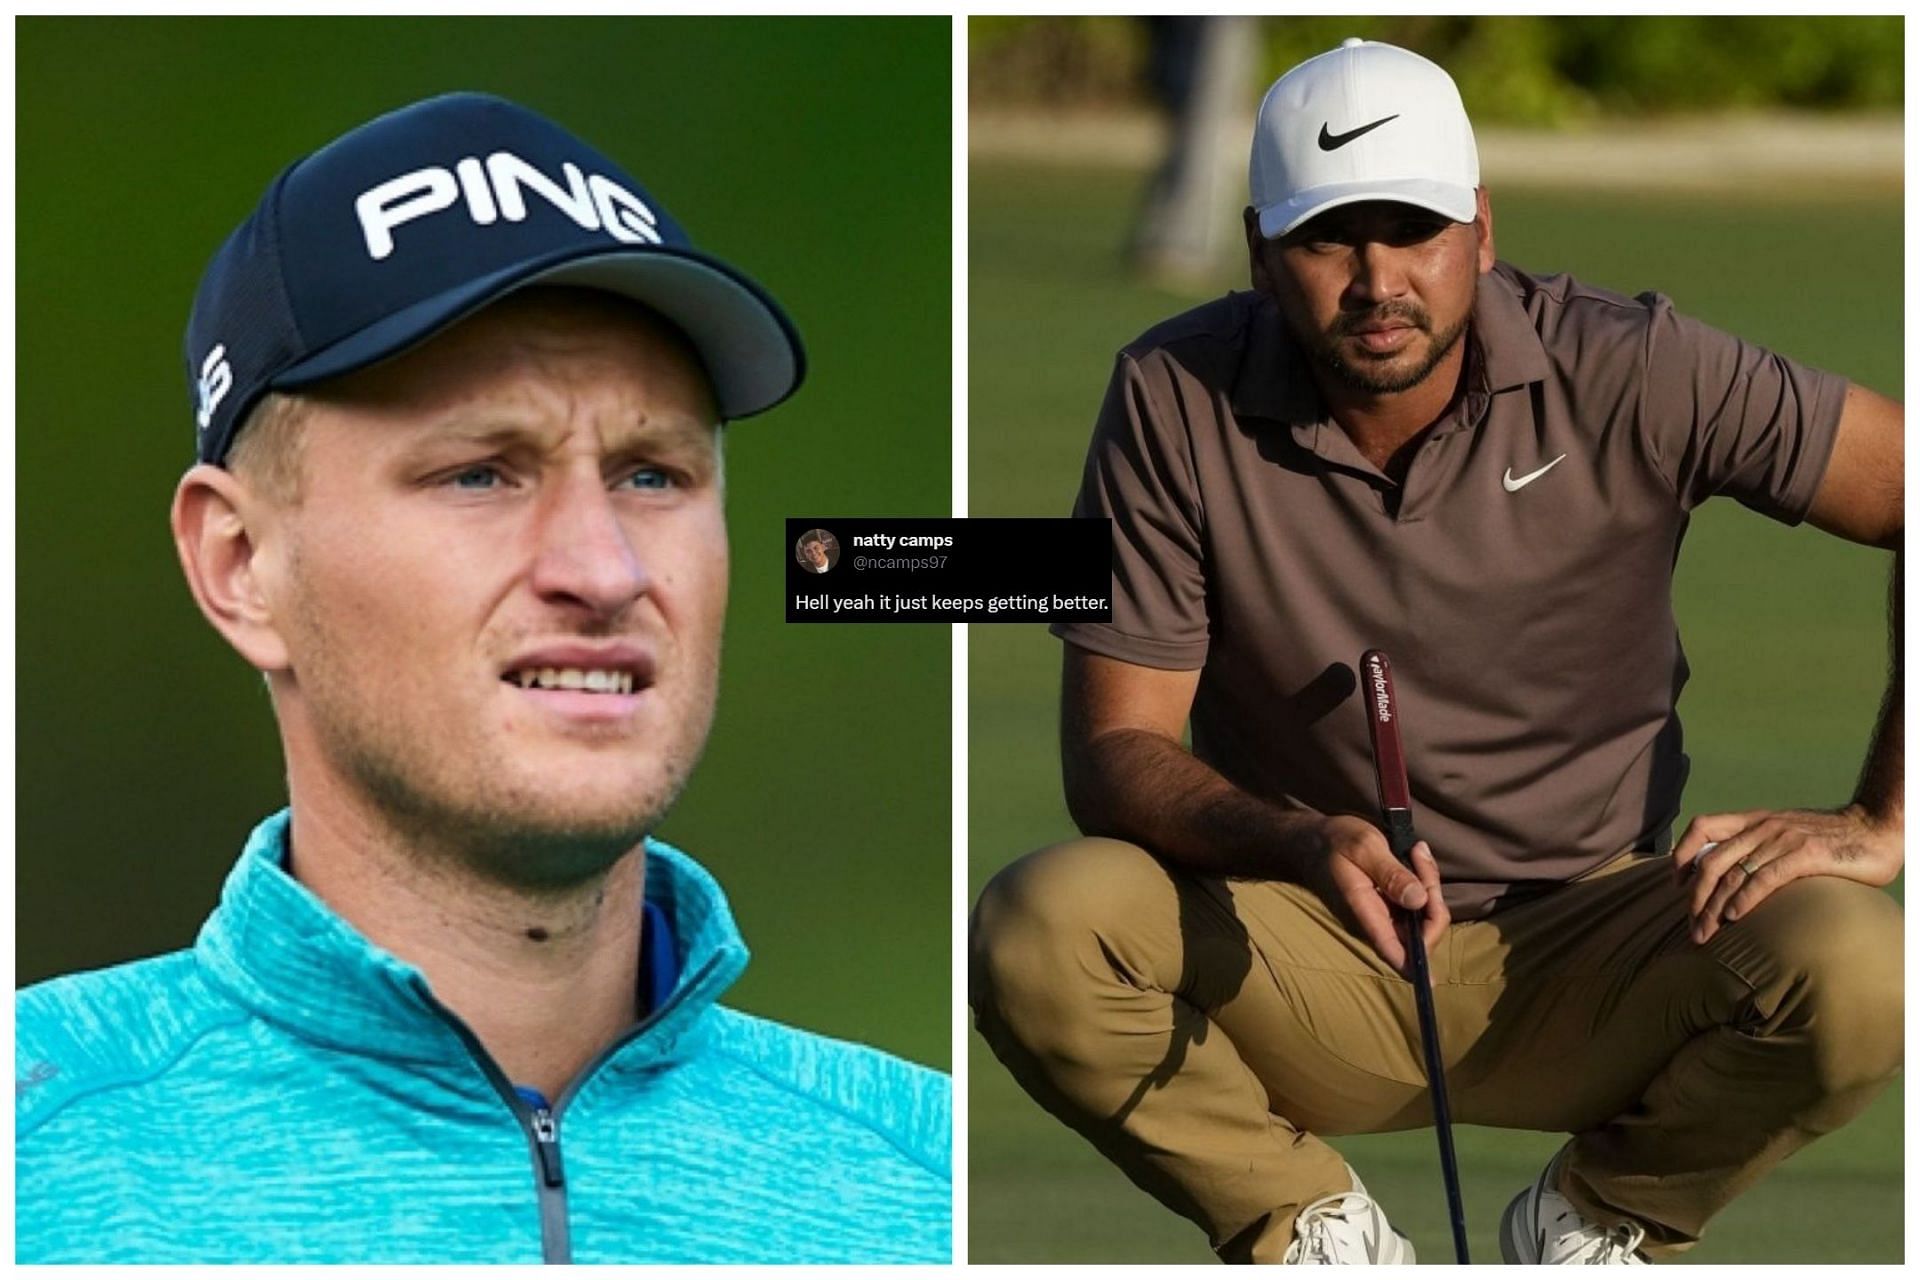 Adrian Meronk and Jason Day are rumored to join the LIV Golf